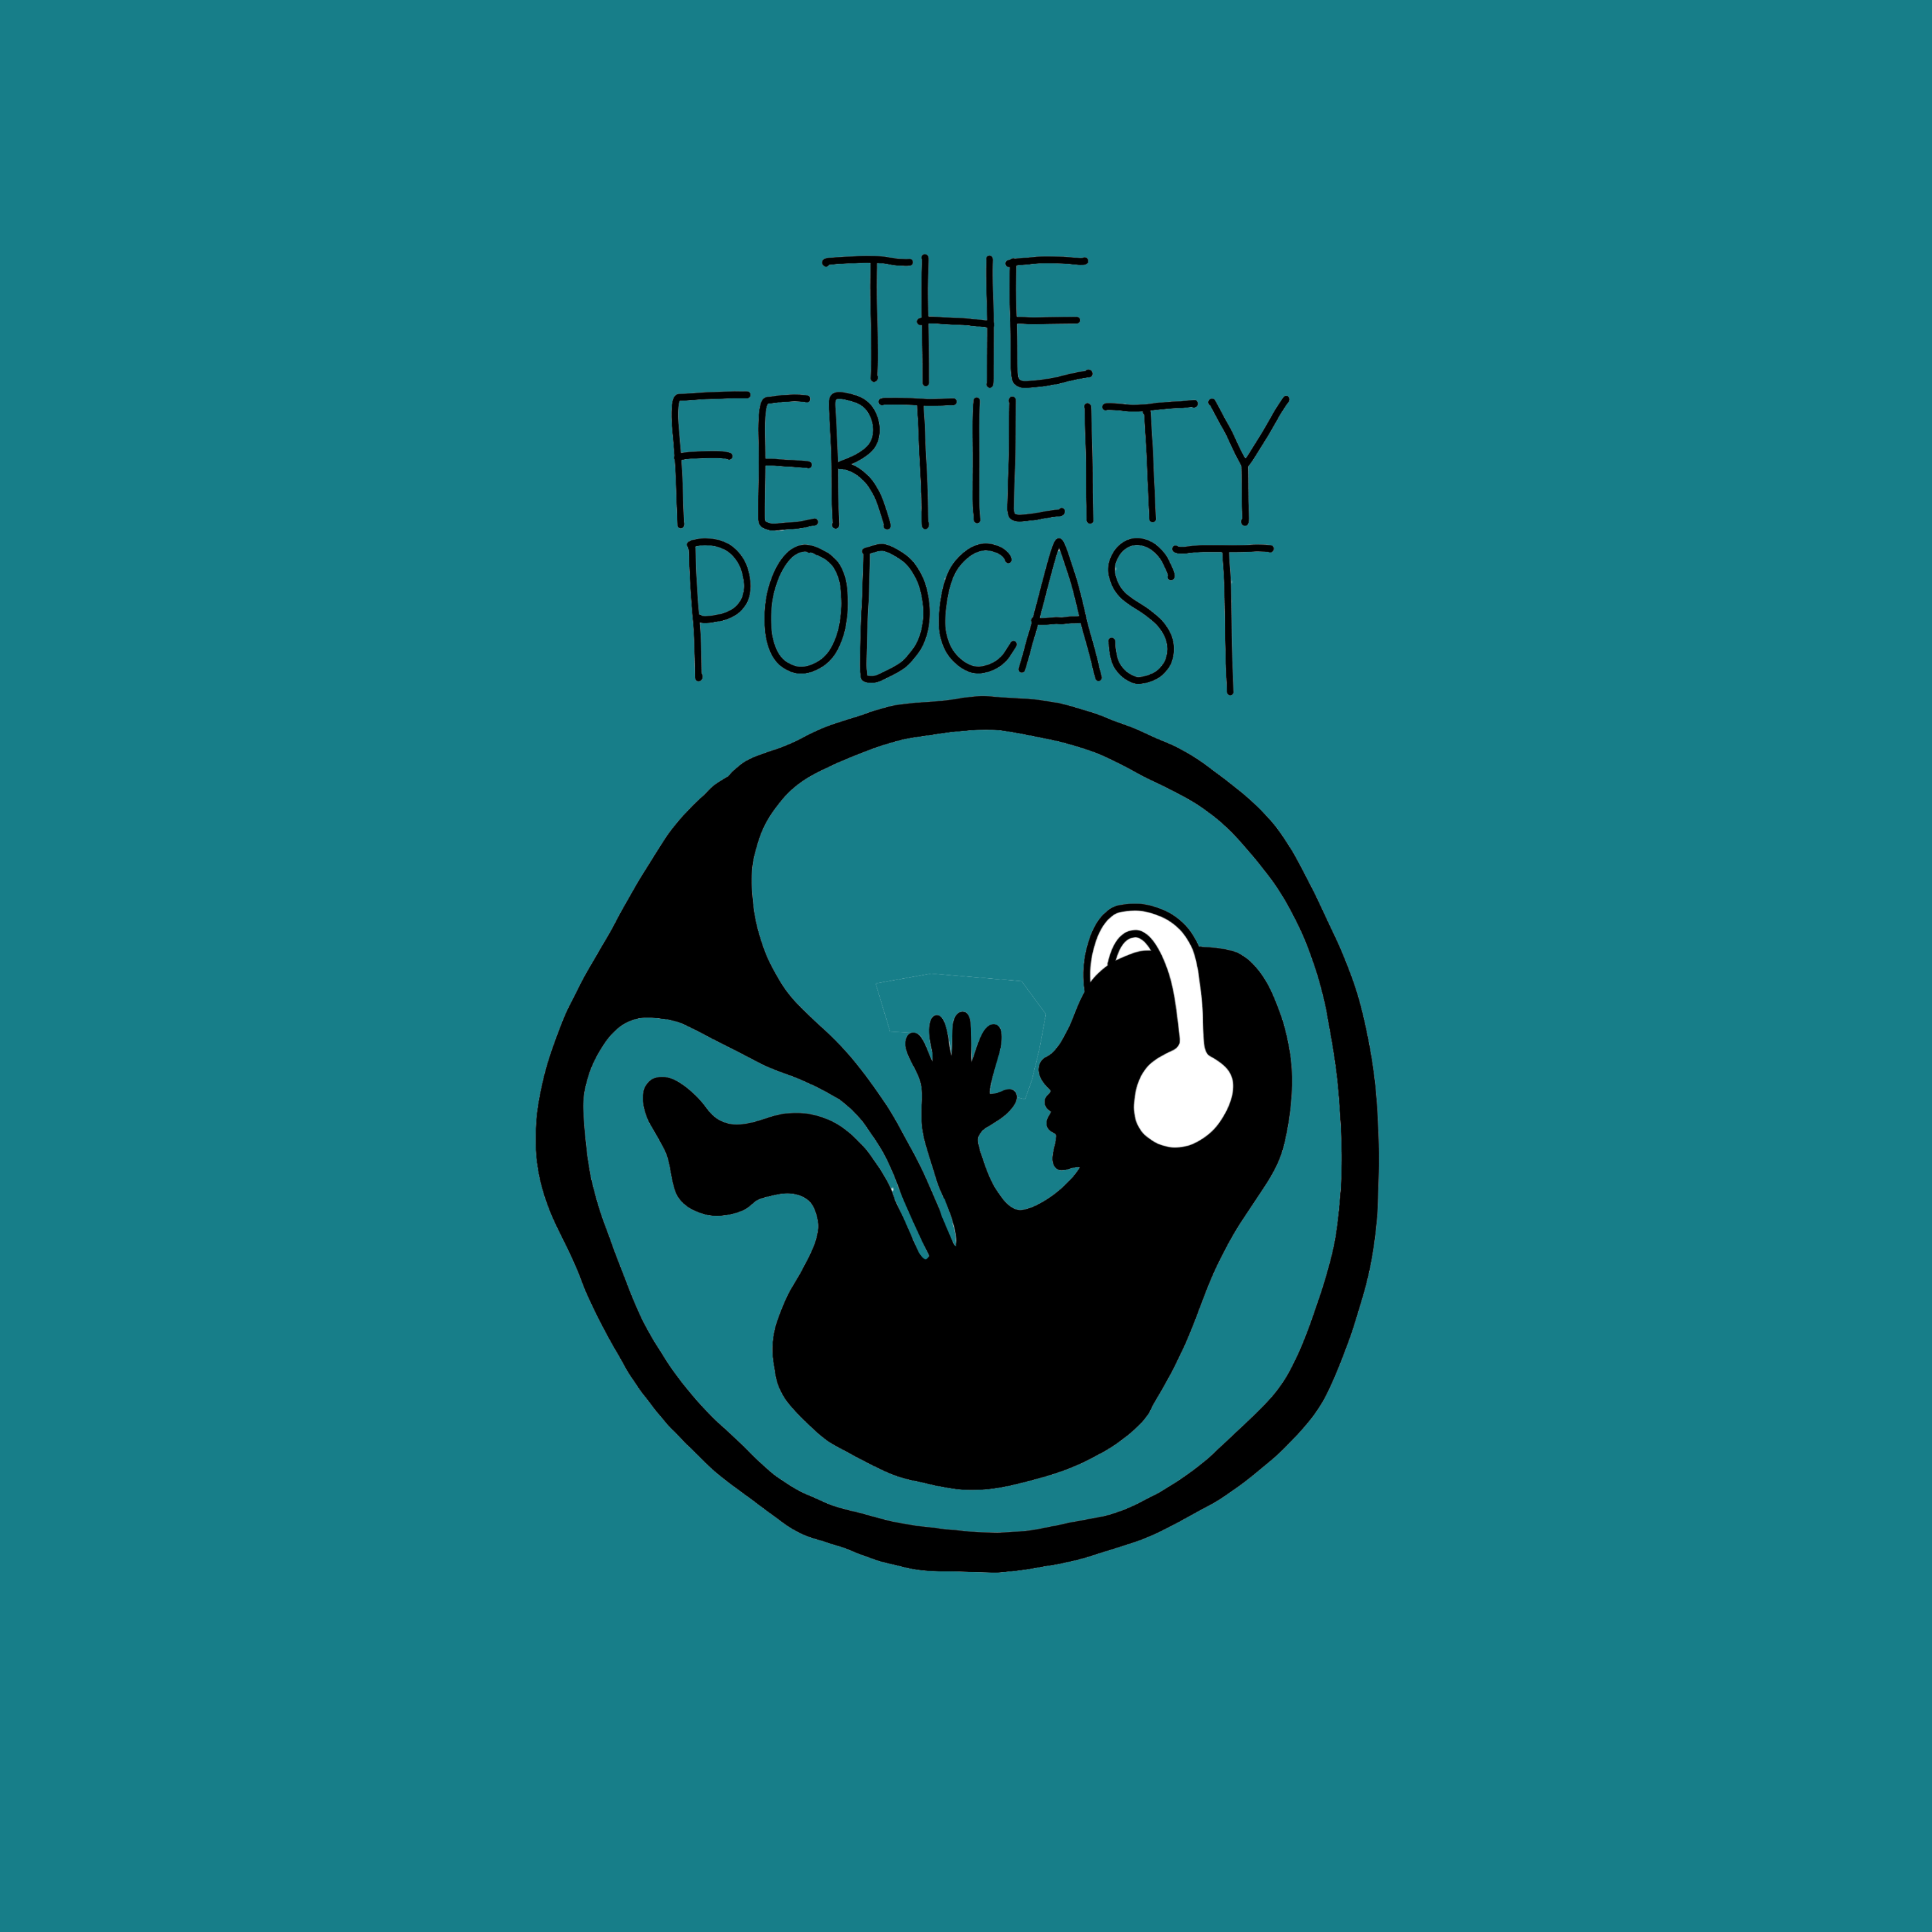 What’s happening with The Fertility Podcast in 2022